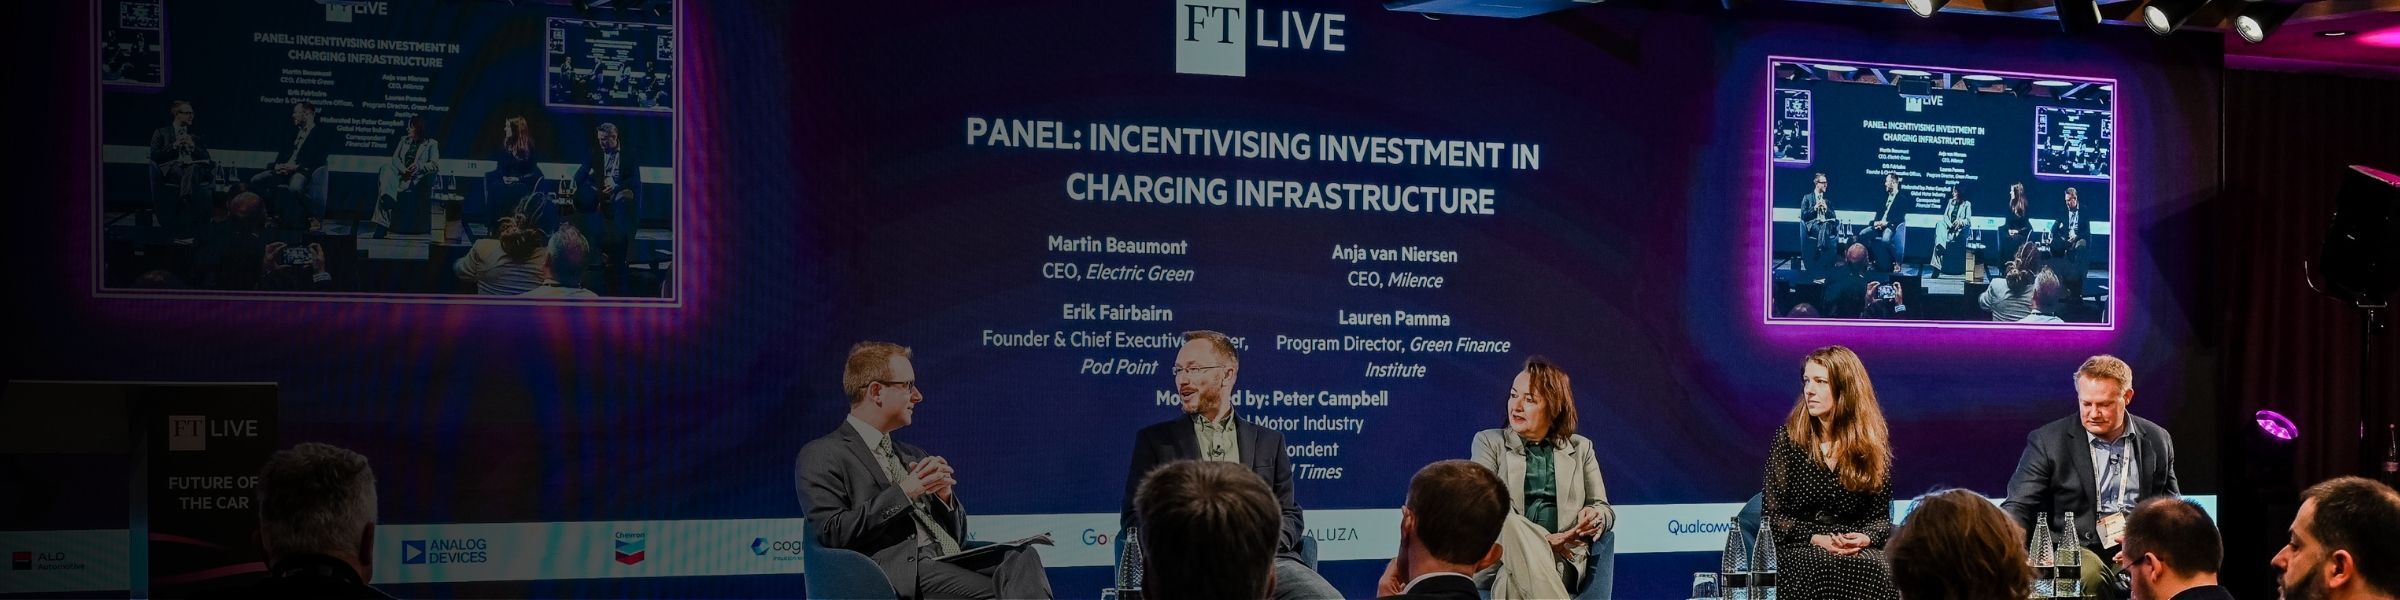 Pod Point CEO joins global leaders at Financial Times event